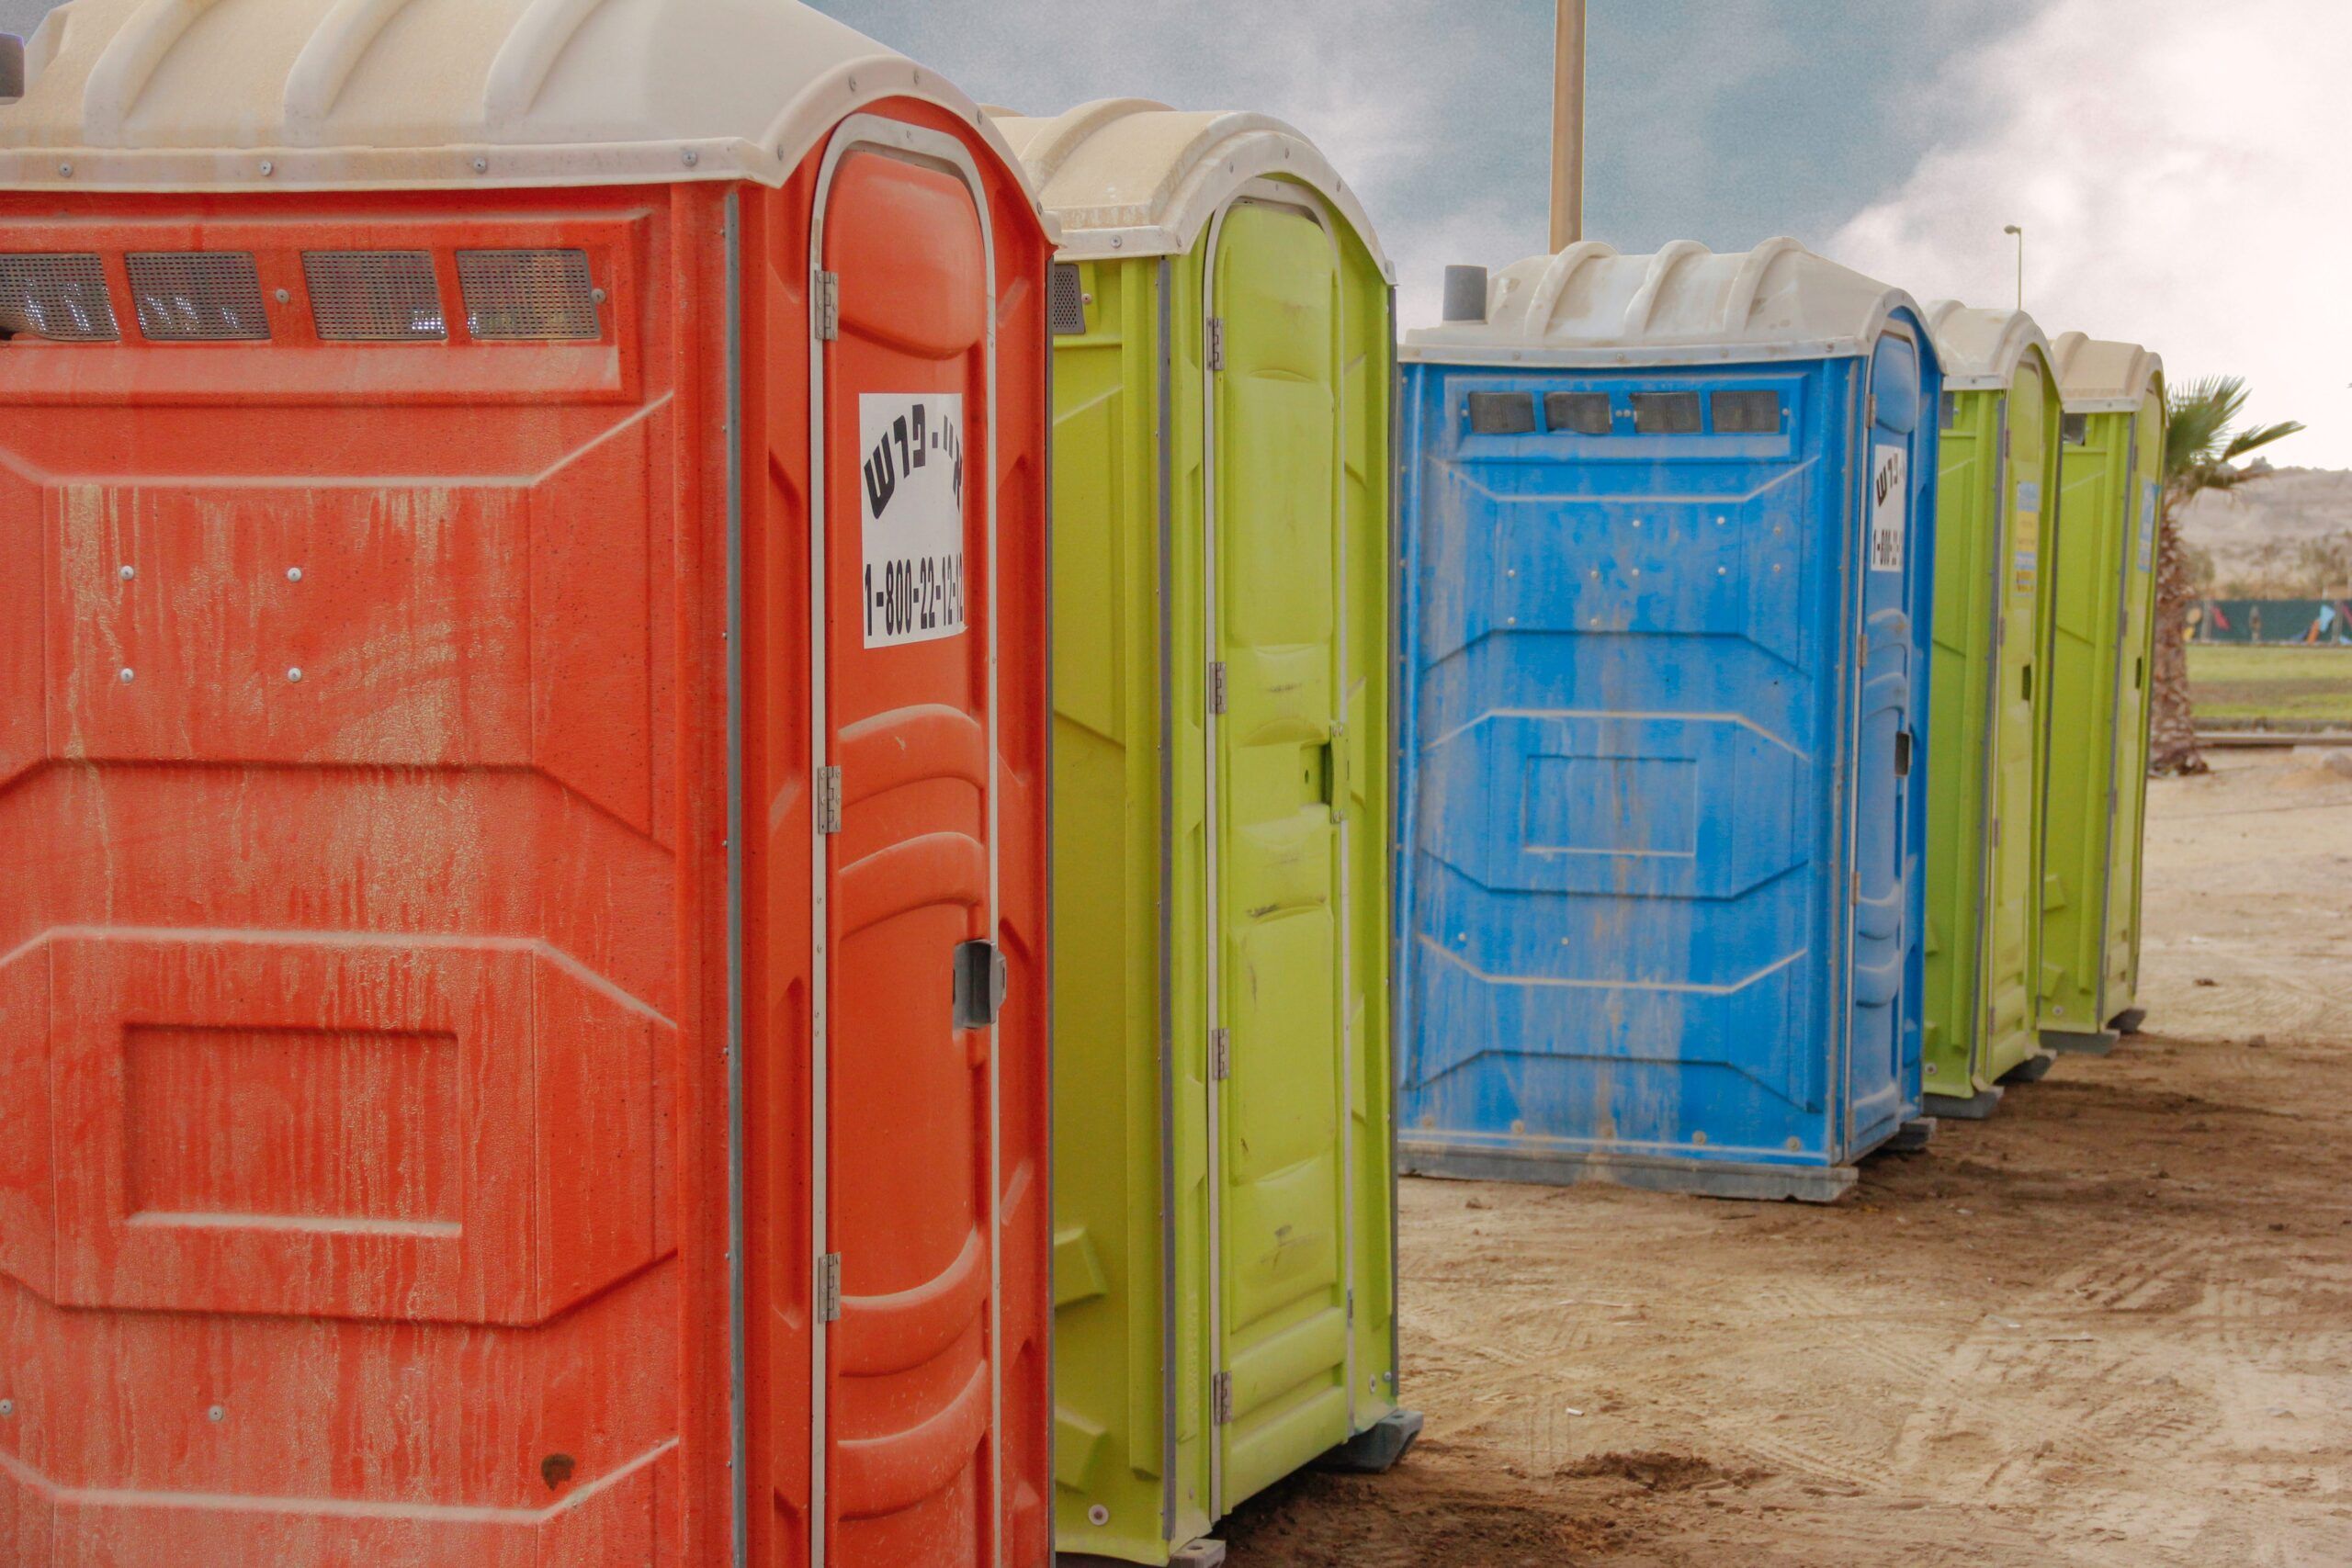 Row of red, yellow and blue portable toilets on sand